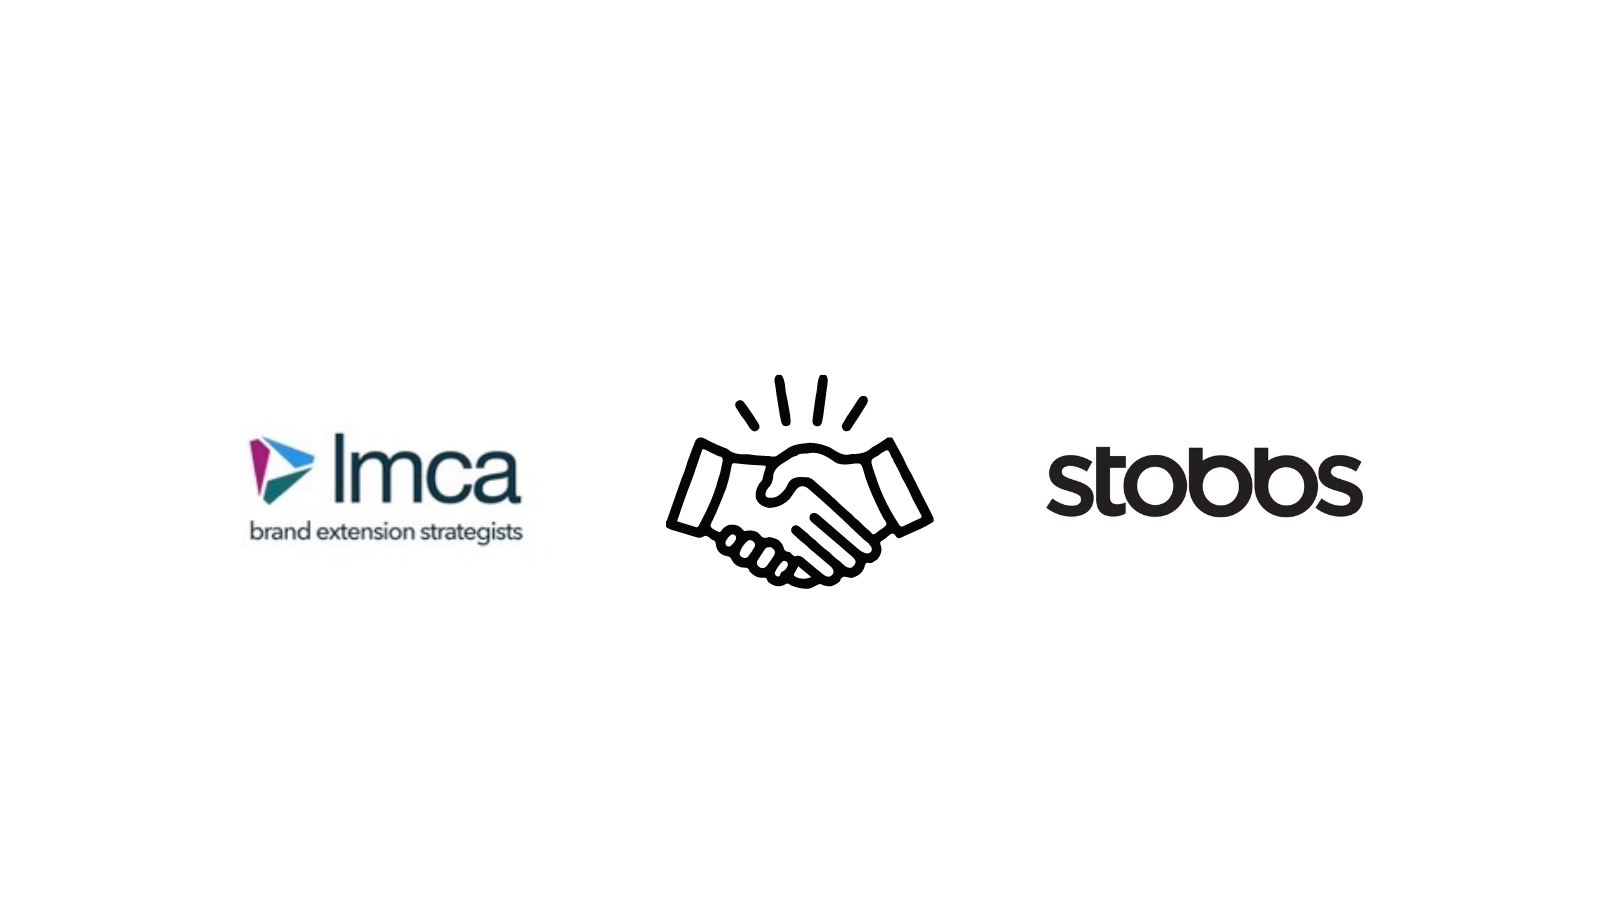 We are excited to announce our new partnership with LMCA!